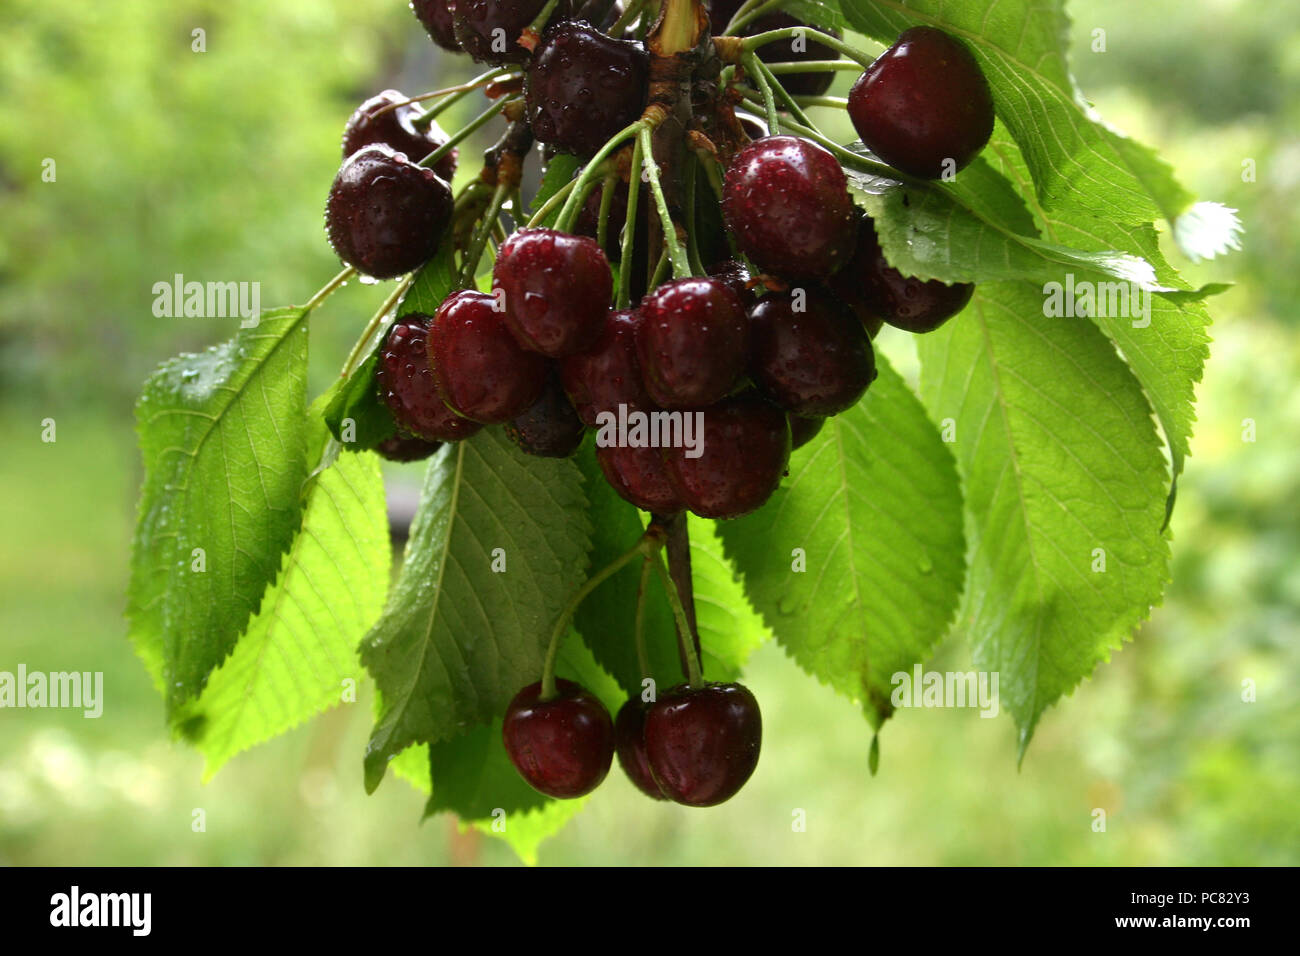 Close-up of ripe cherries in the tree Stock Photo